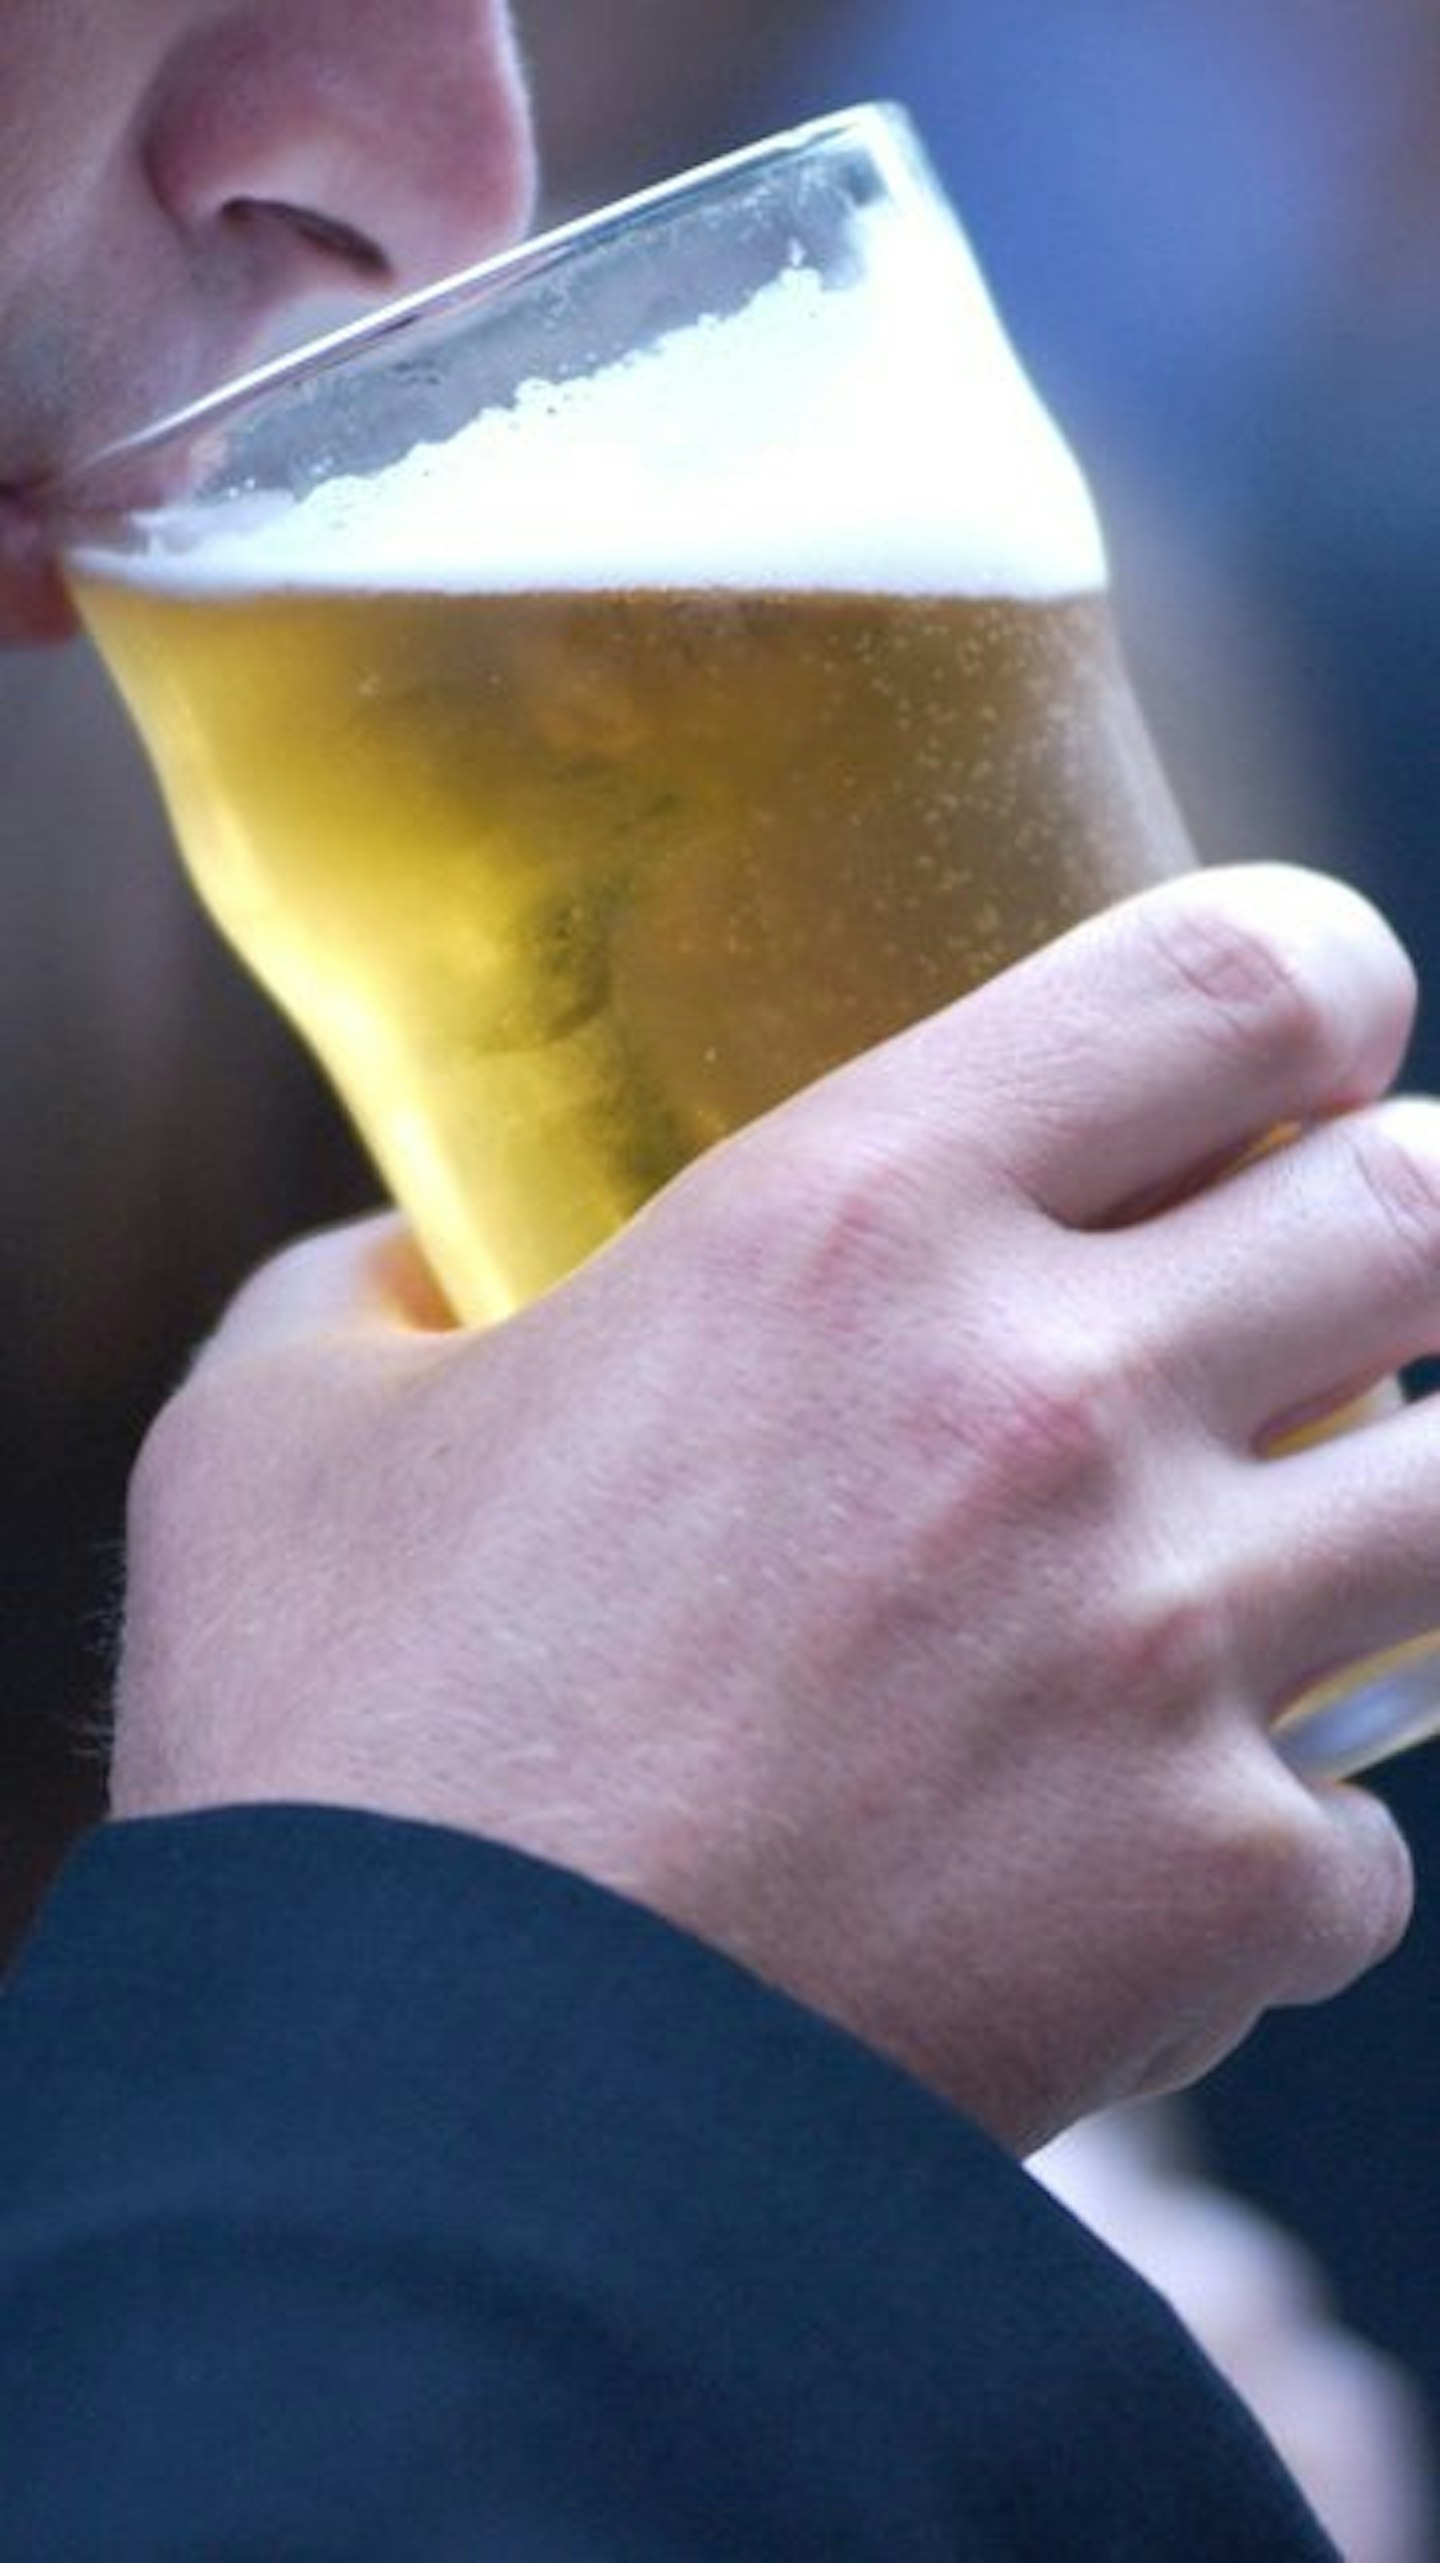 The rules are set to come into action to reduce drunken violence.